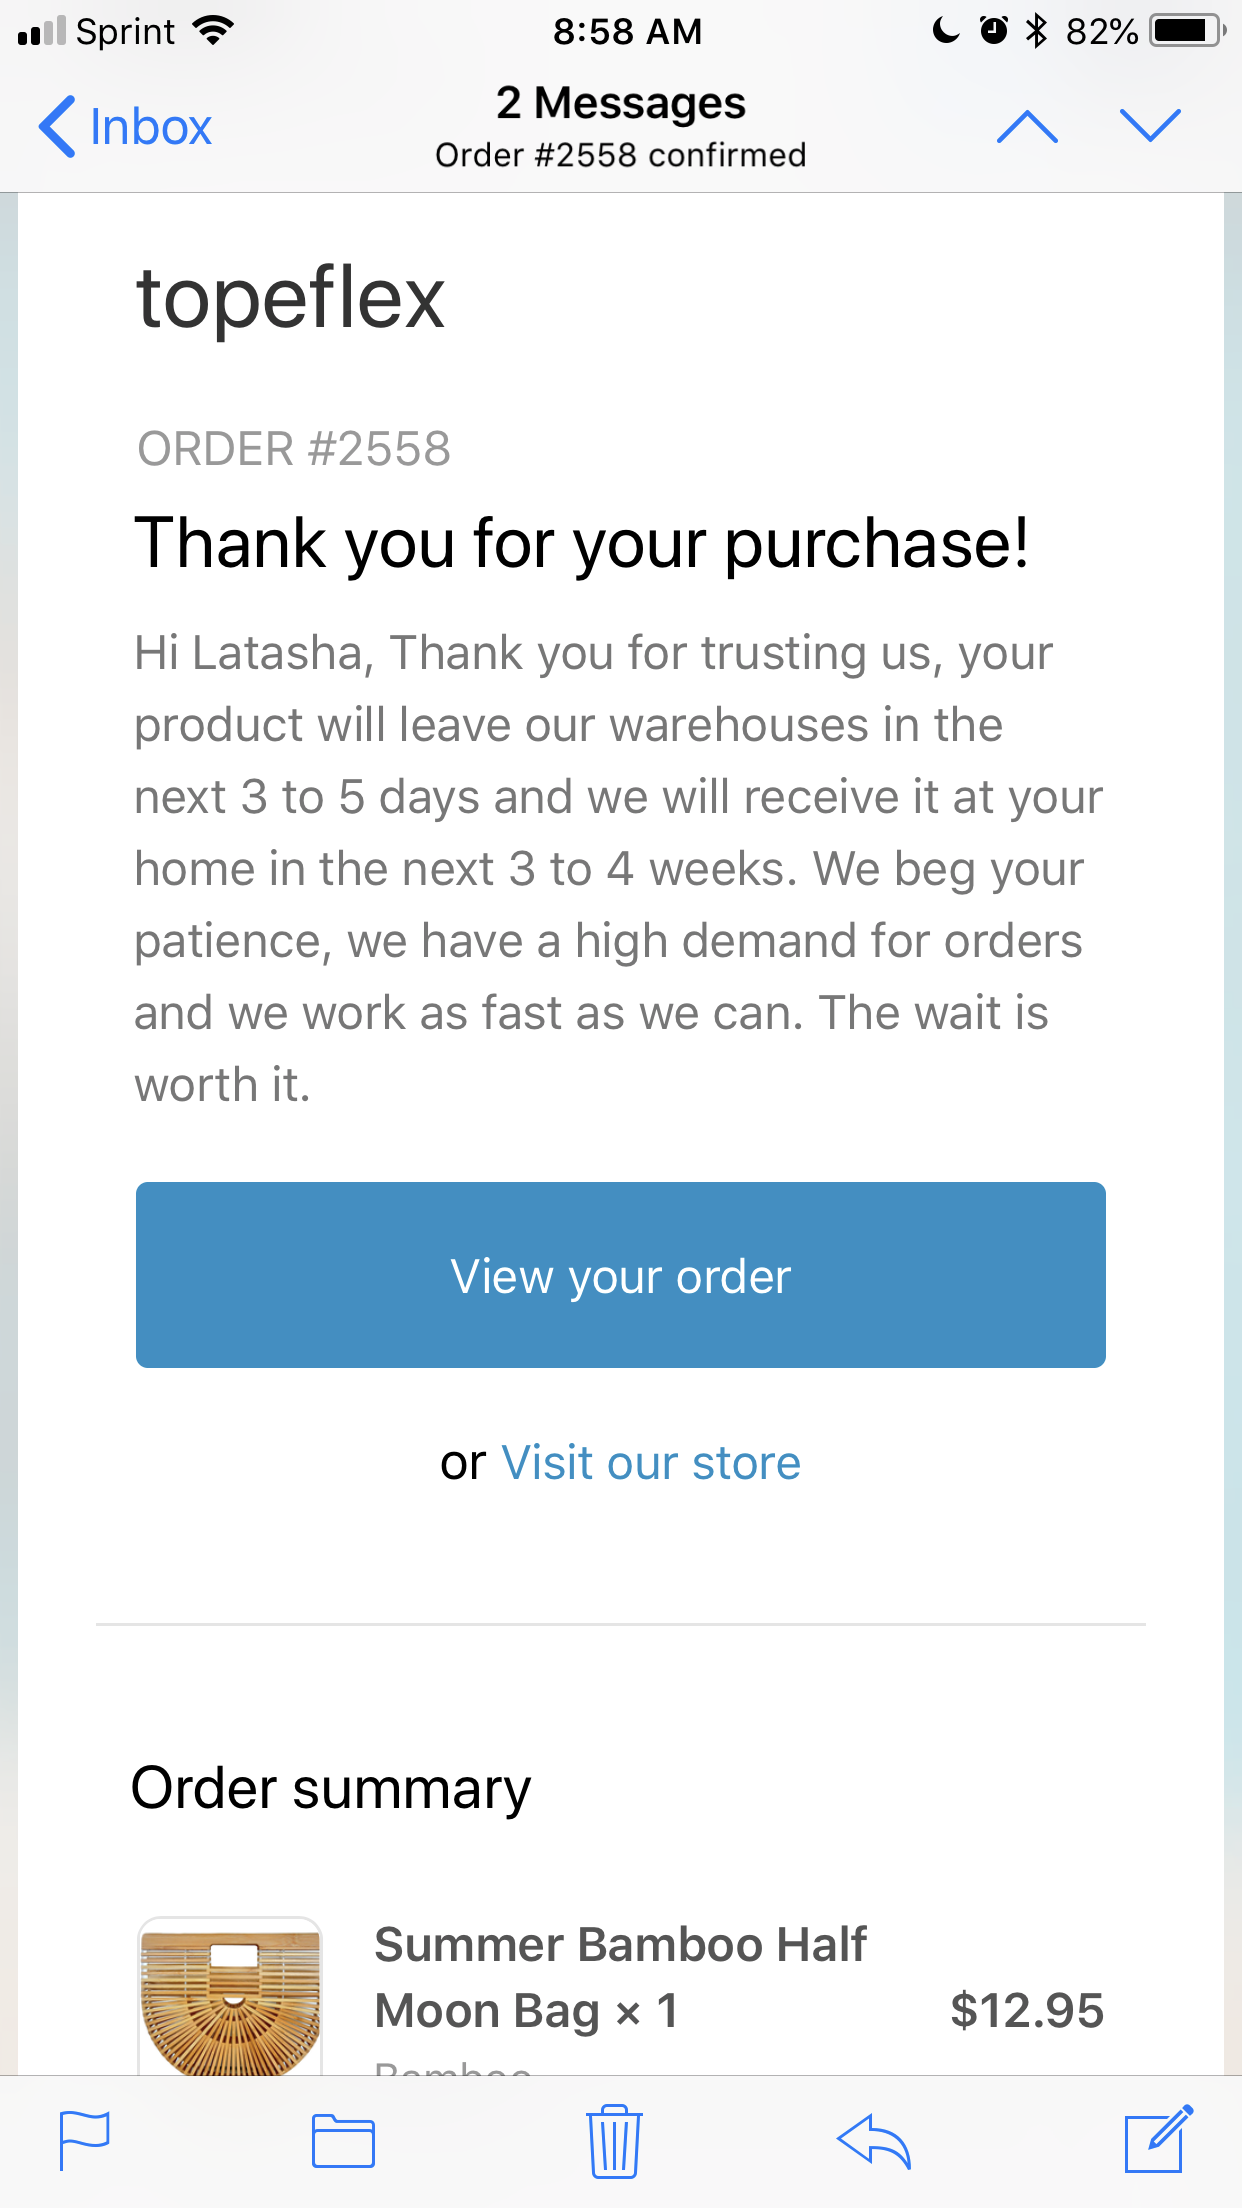 My order confirmation 